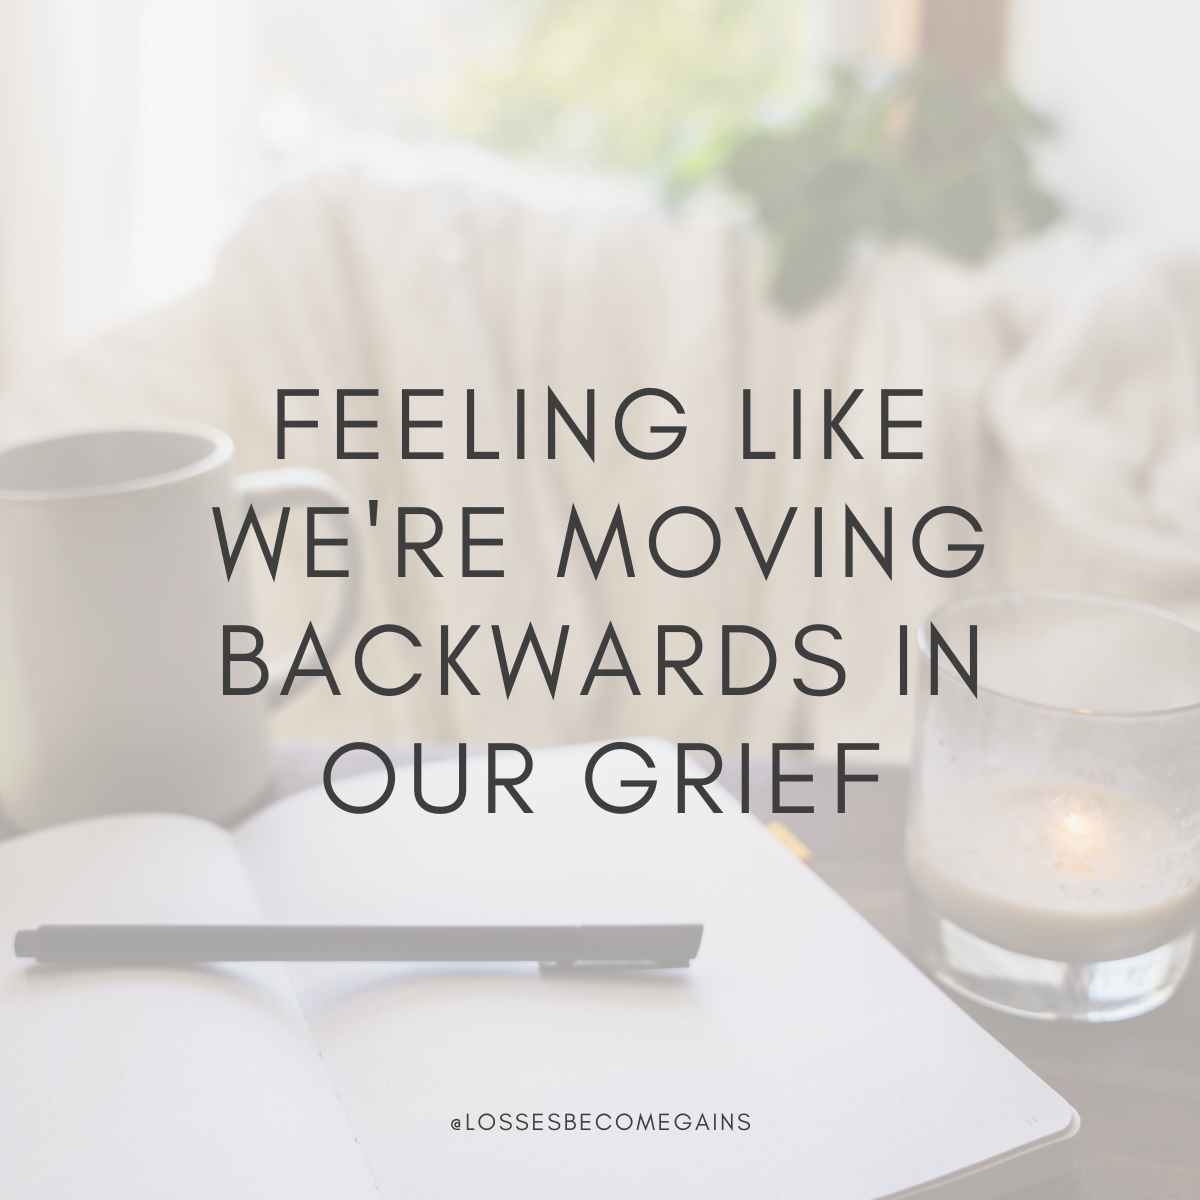 Feeling Like We're Moving Backwards in Our Grief by Losses Become Gains